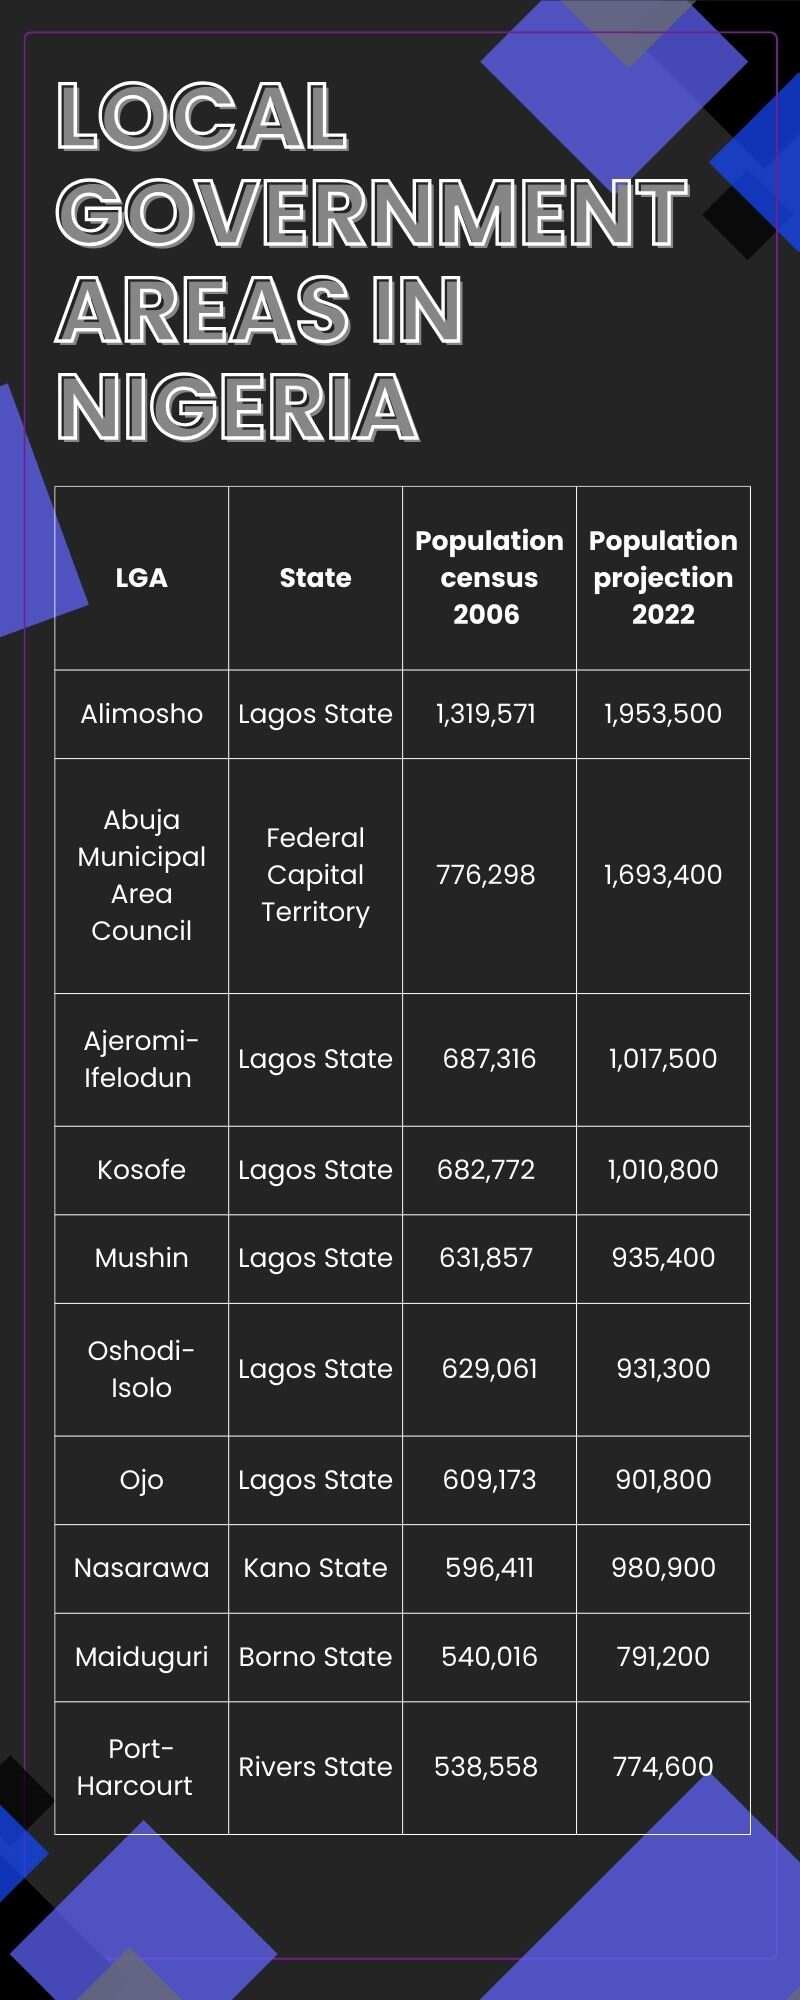 Largest local government areas in Nigeria